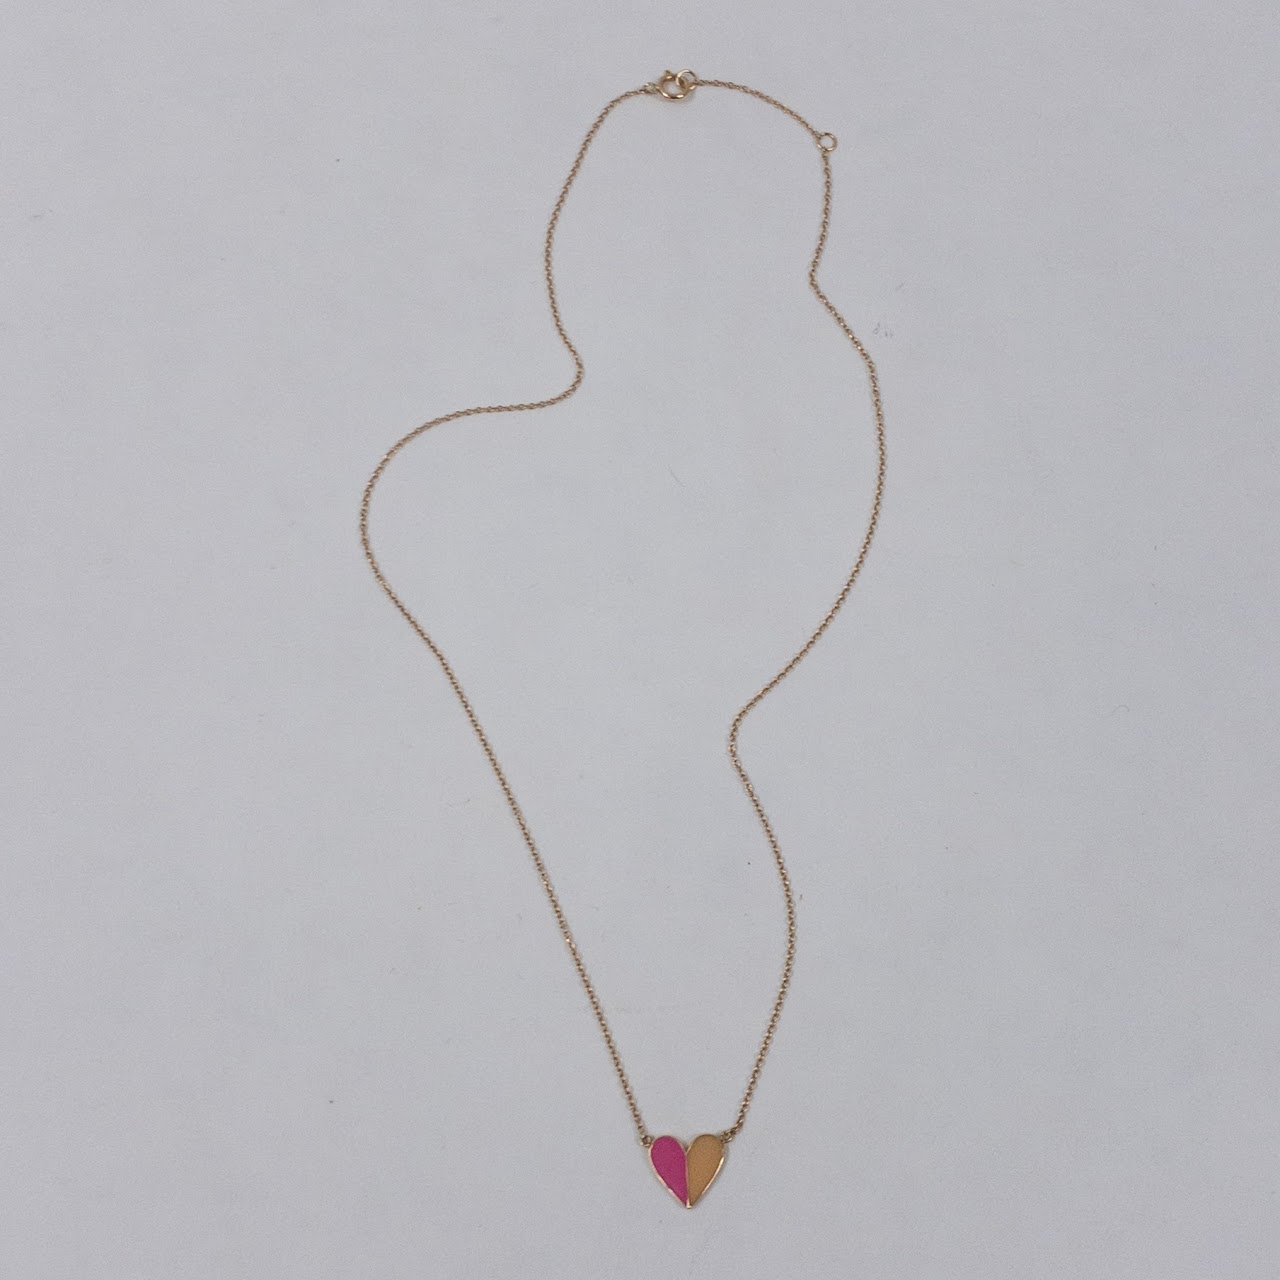 14K Gold and Enamel Heart Pendant Necklace